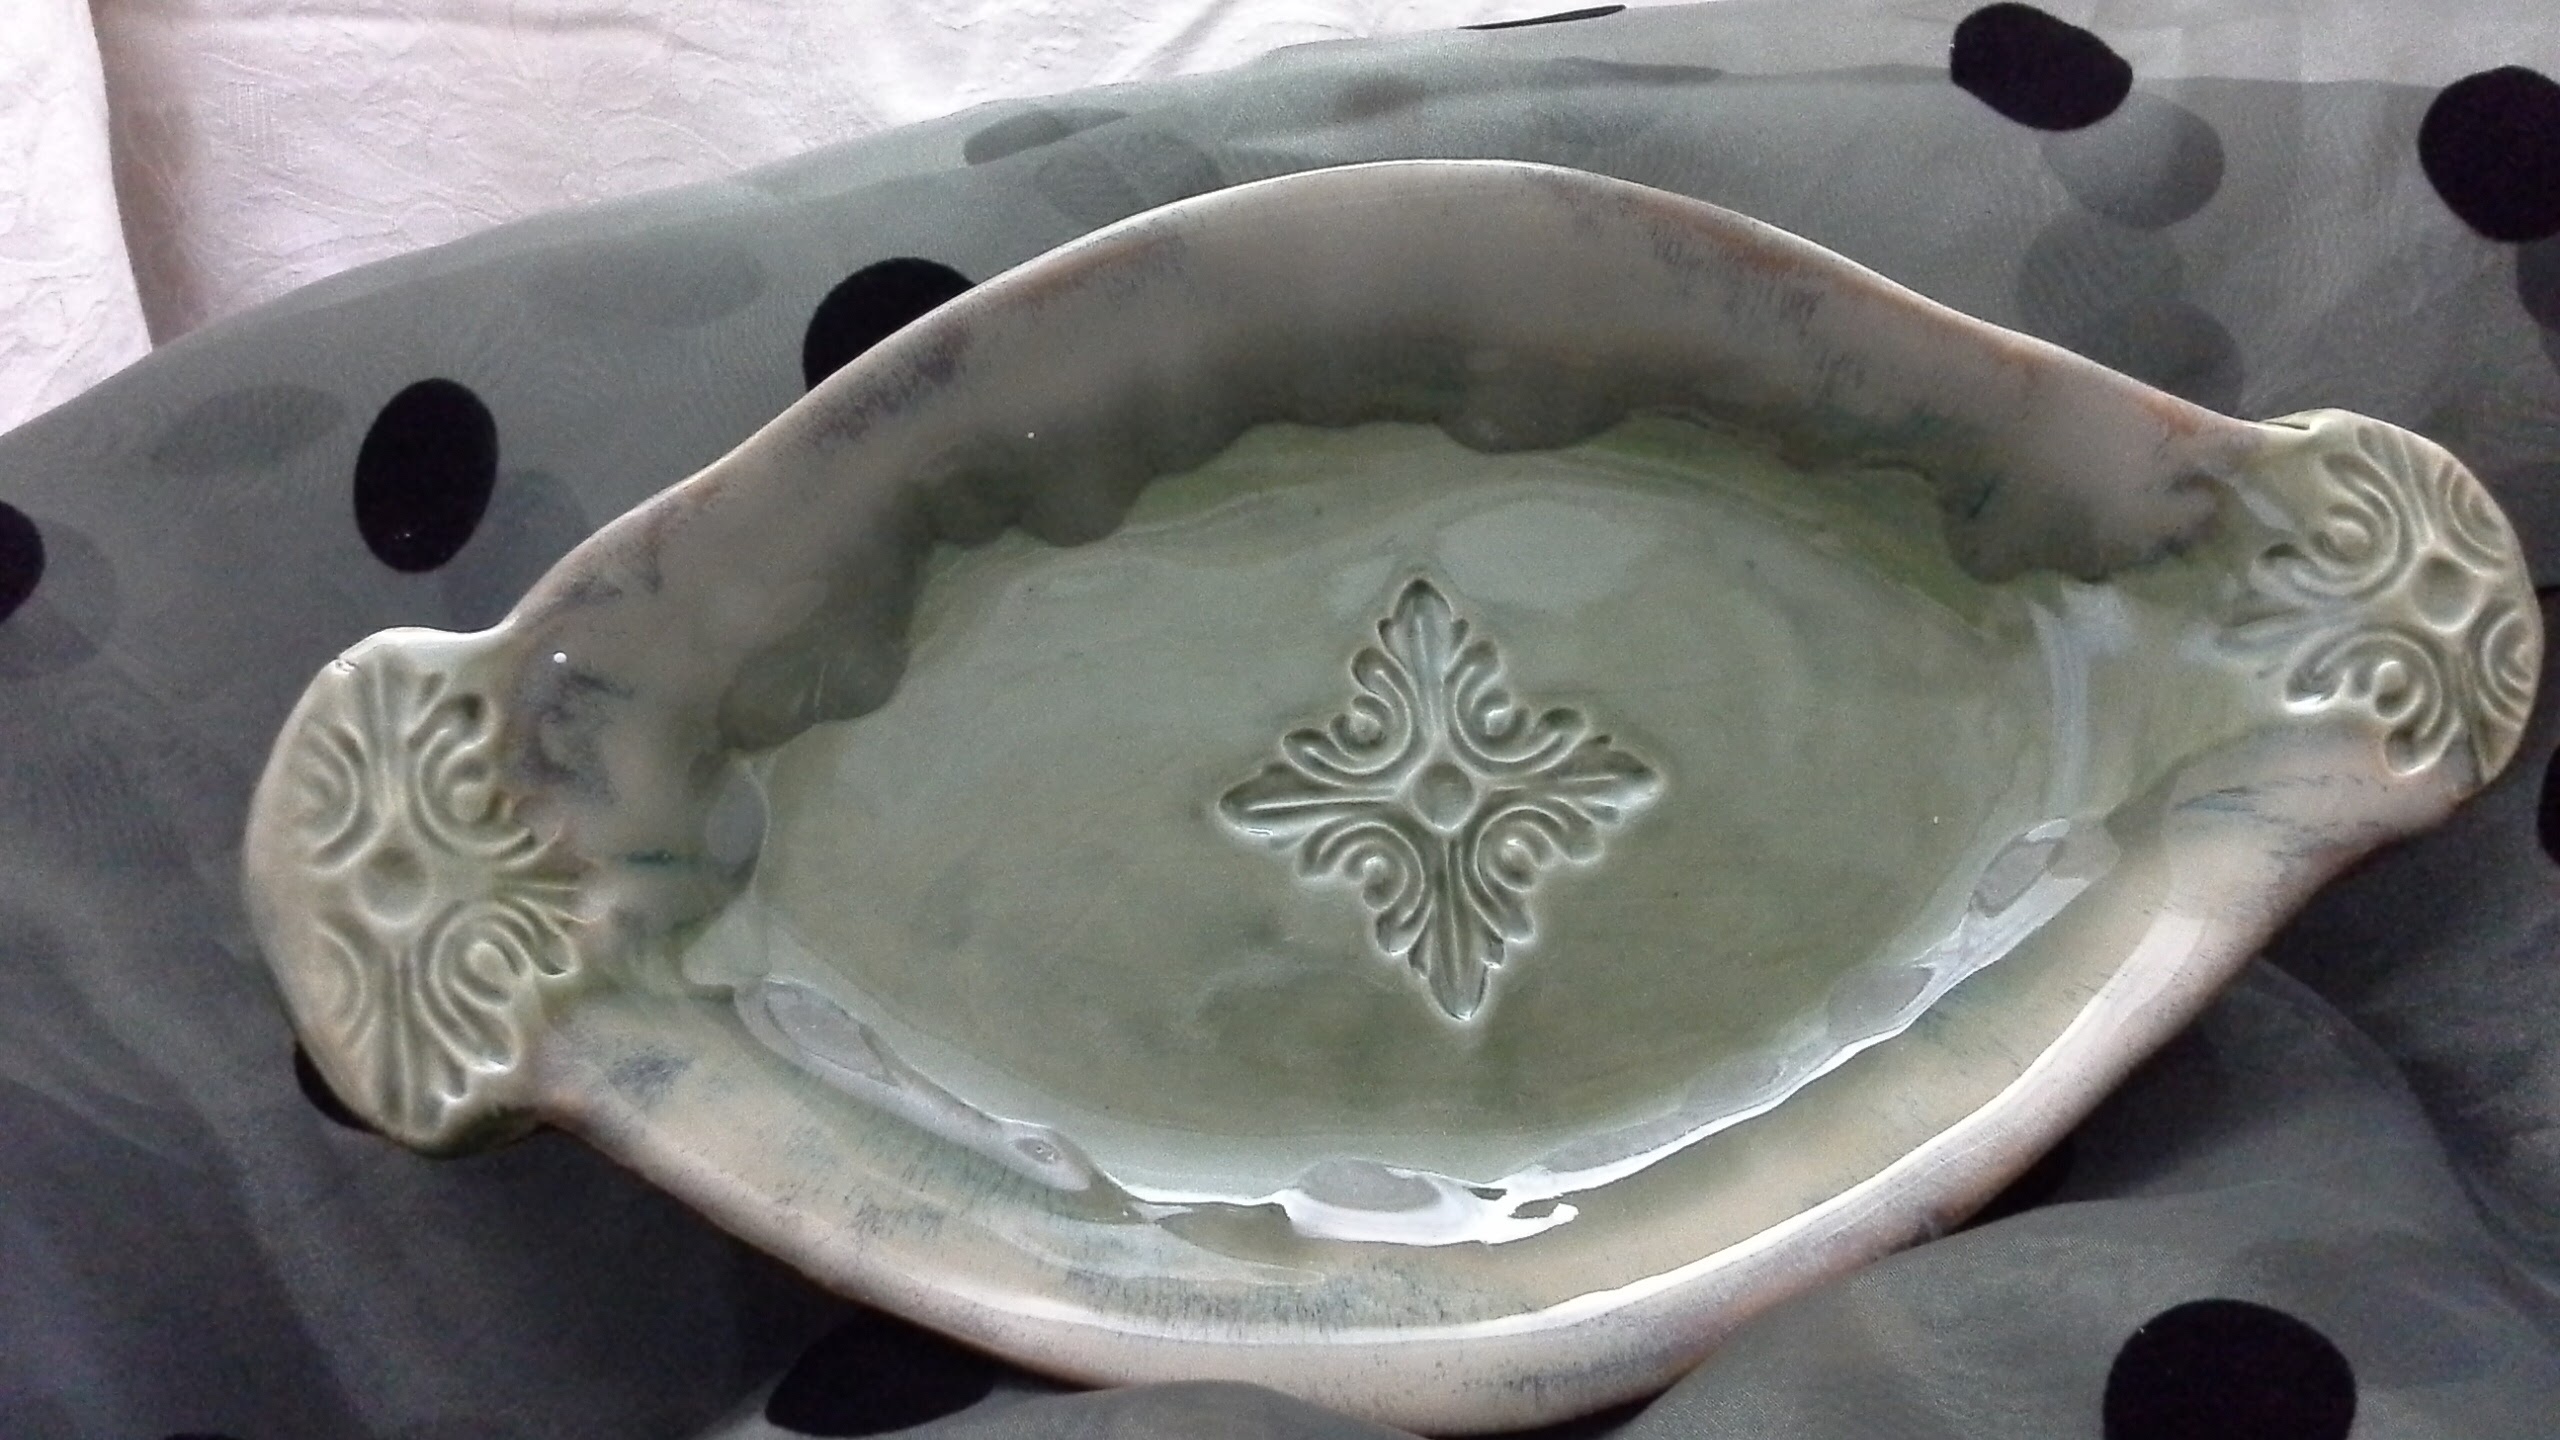 Handmade Embossed Serving Trays From Doing Earth Pottery